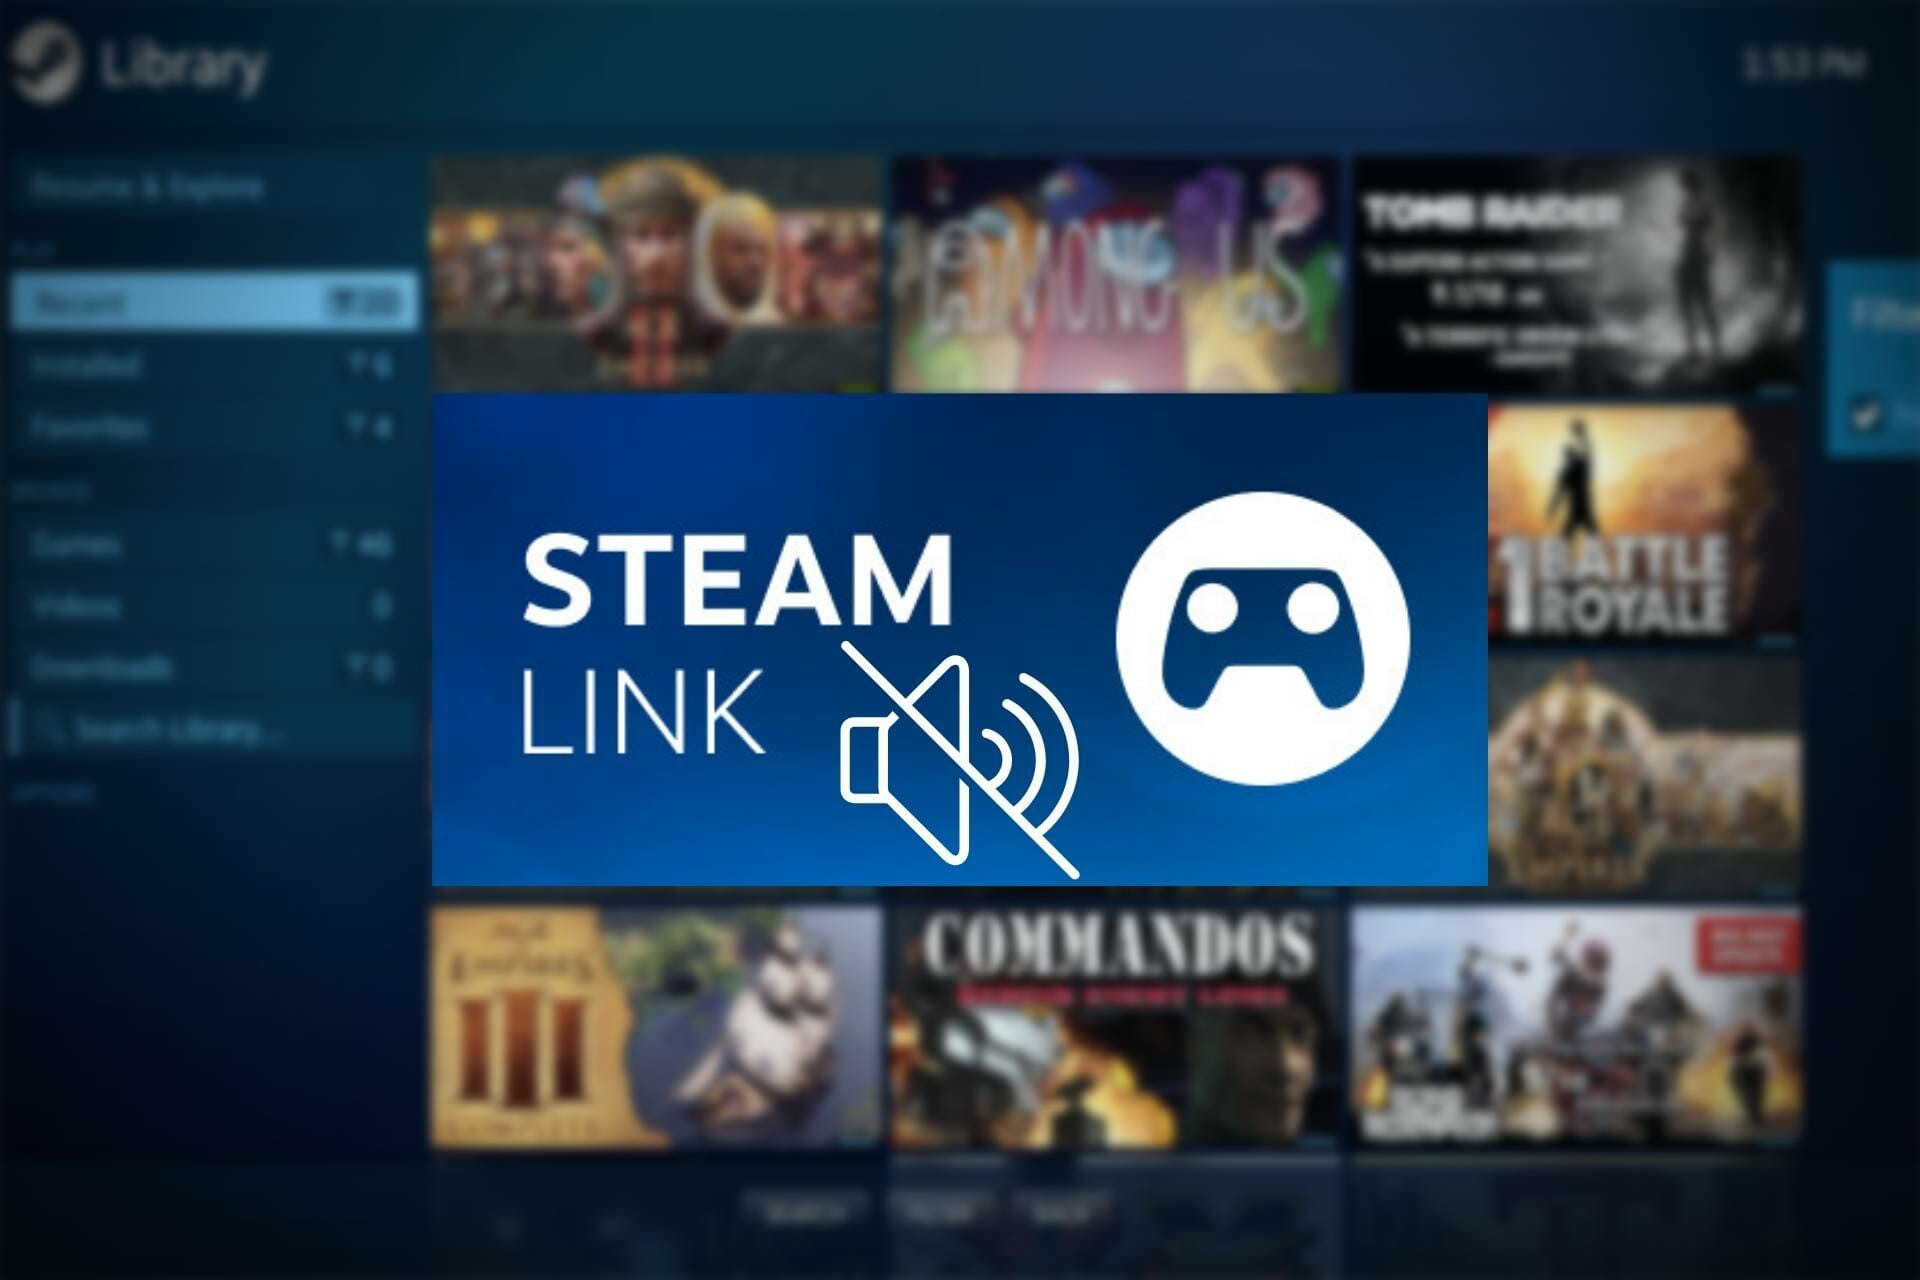 8 Fixes to Steam Remote Play No Sound - Hollyland